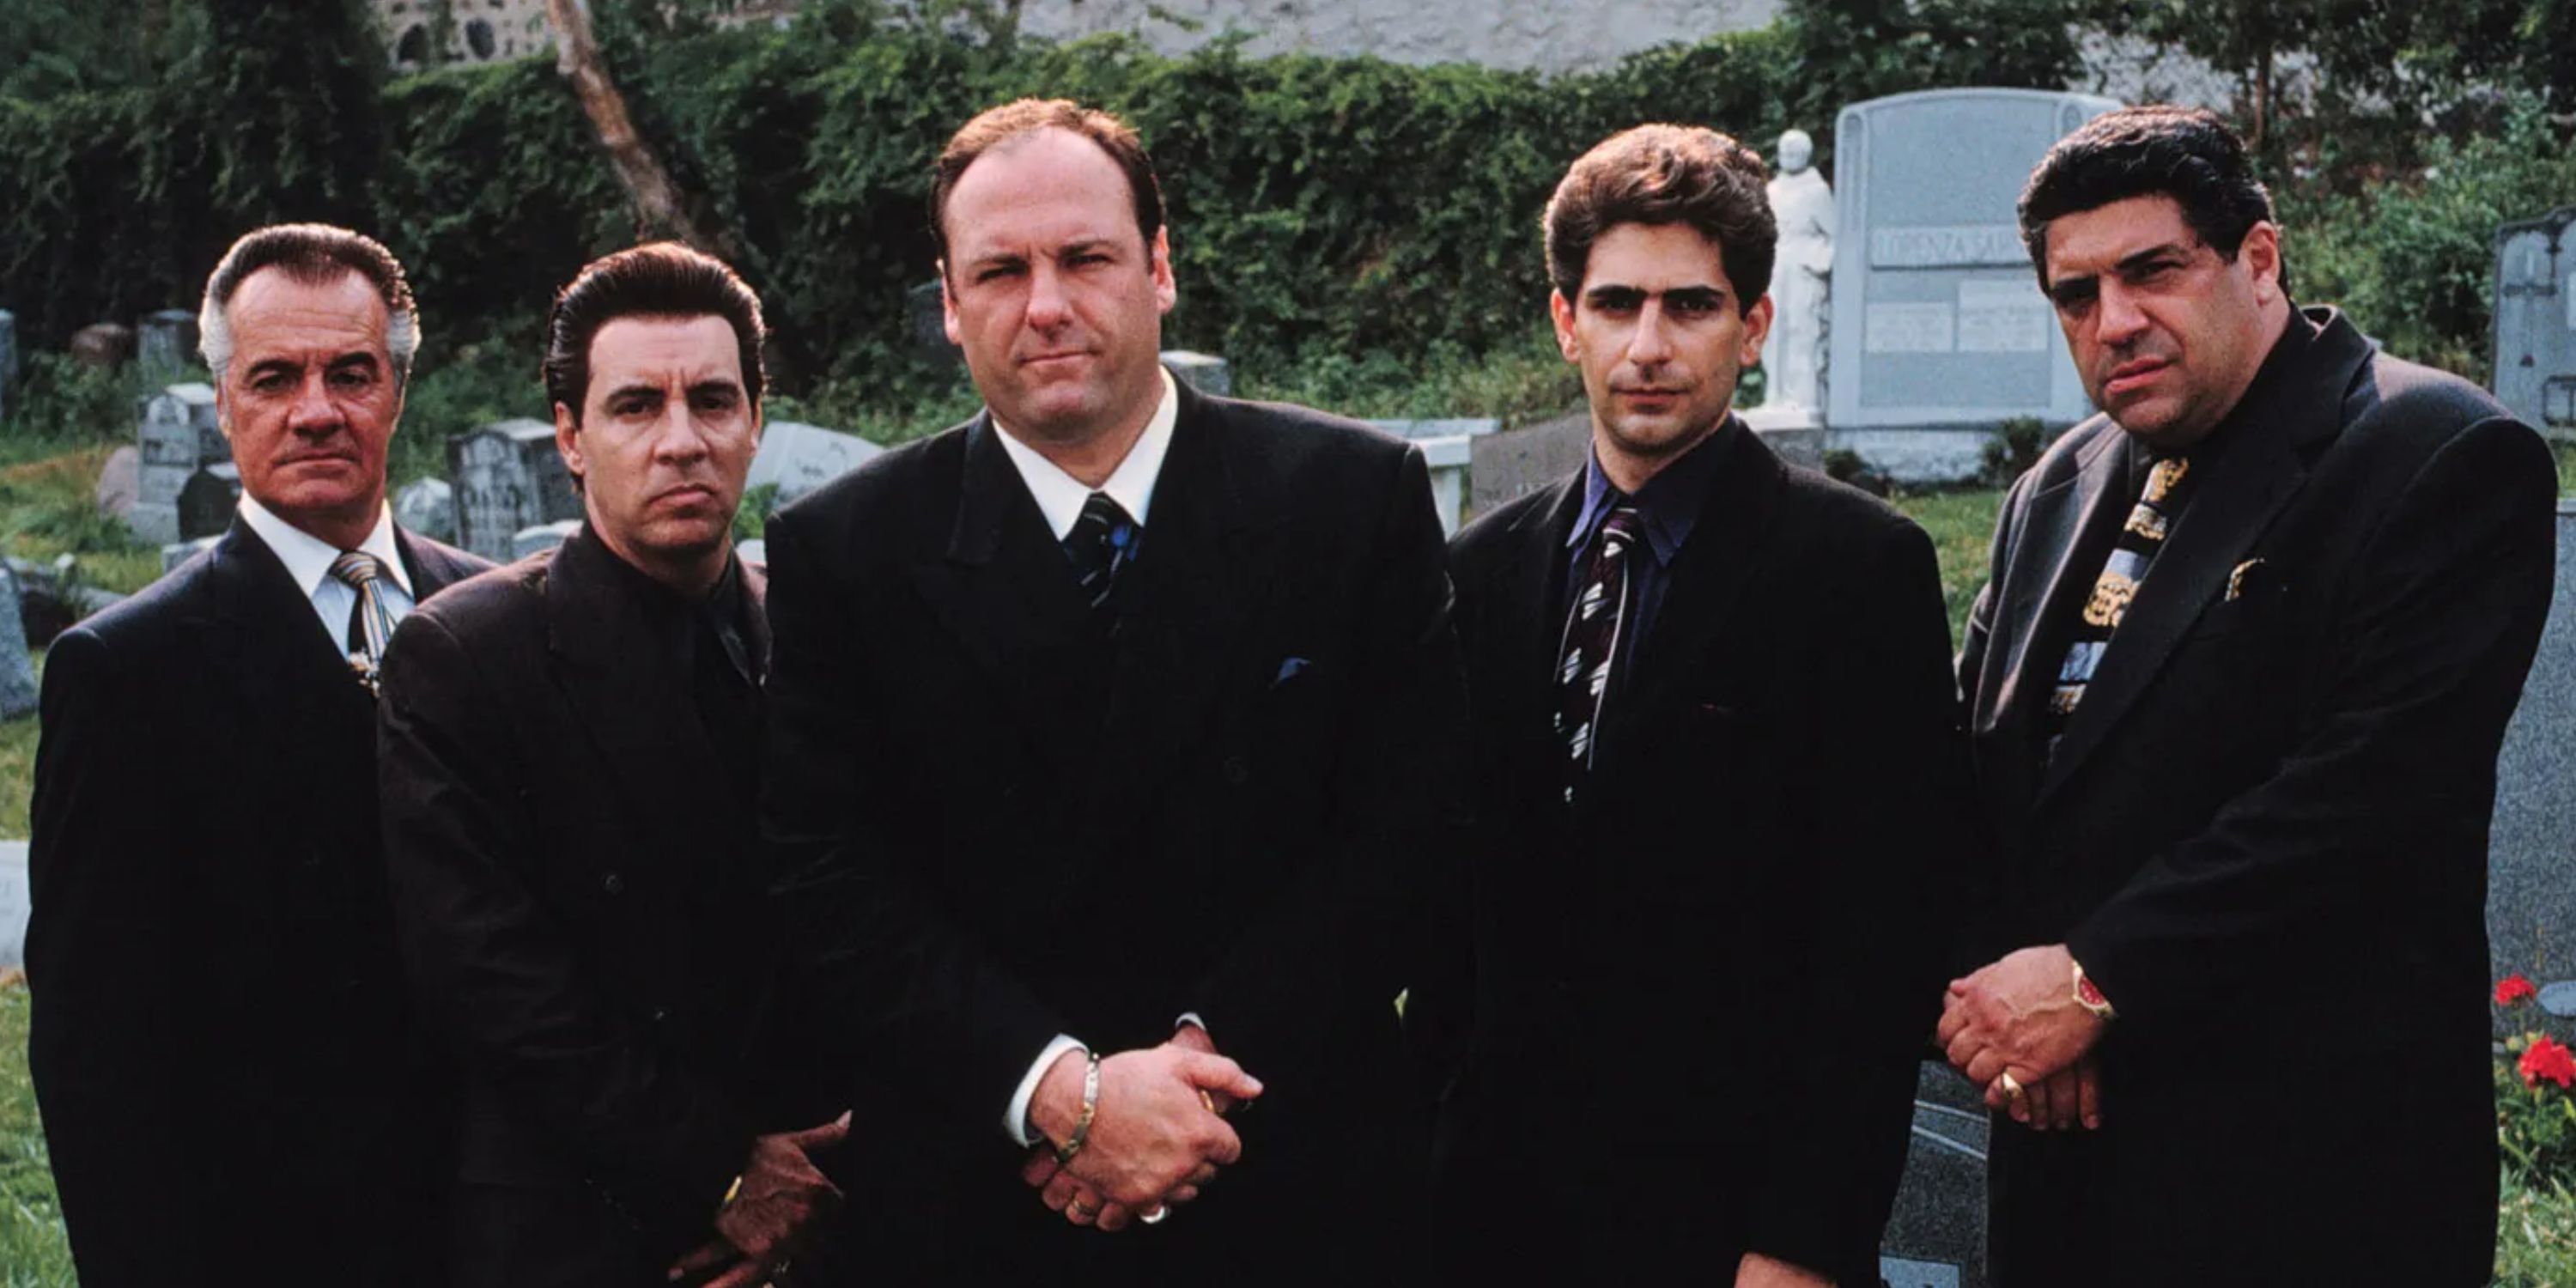 The leading men of the Sopranos in suits at a funeral